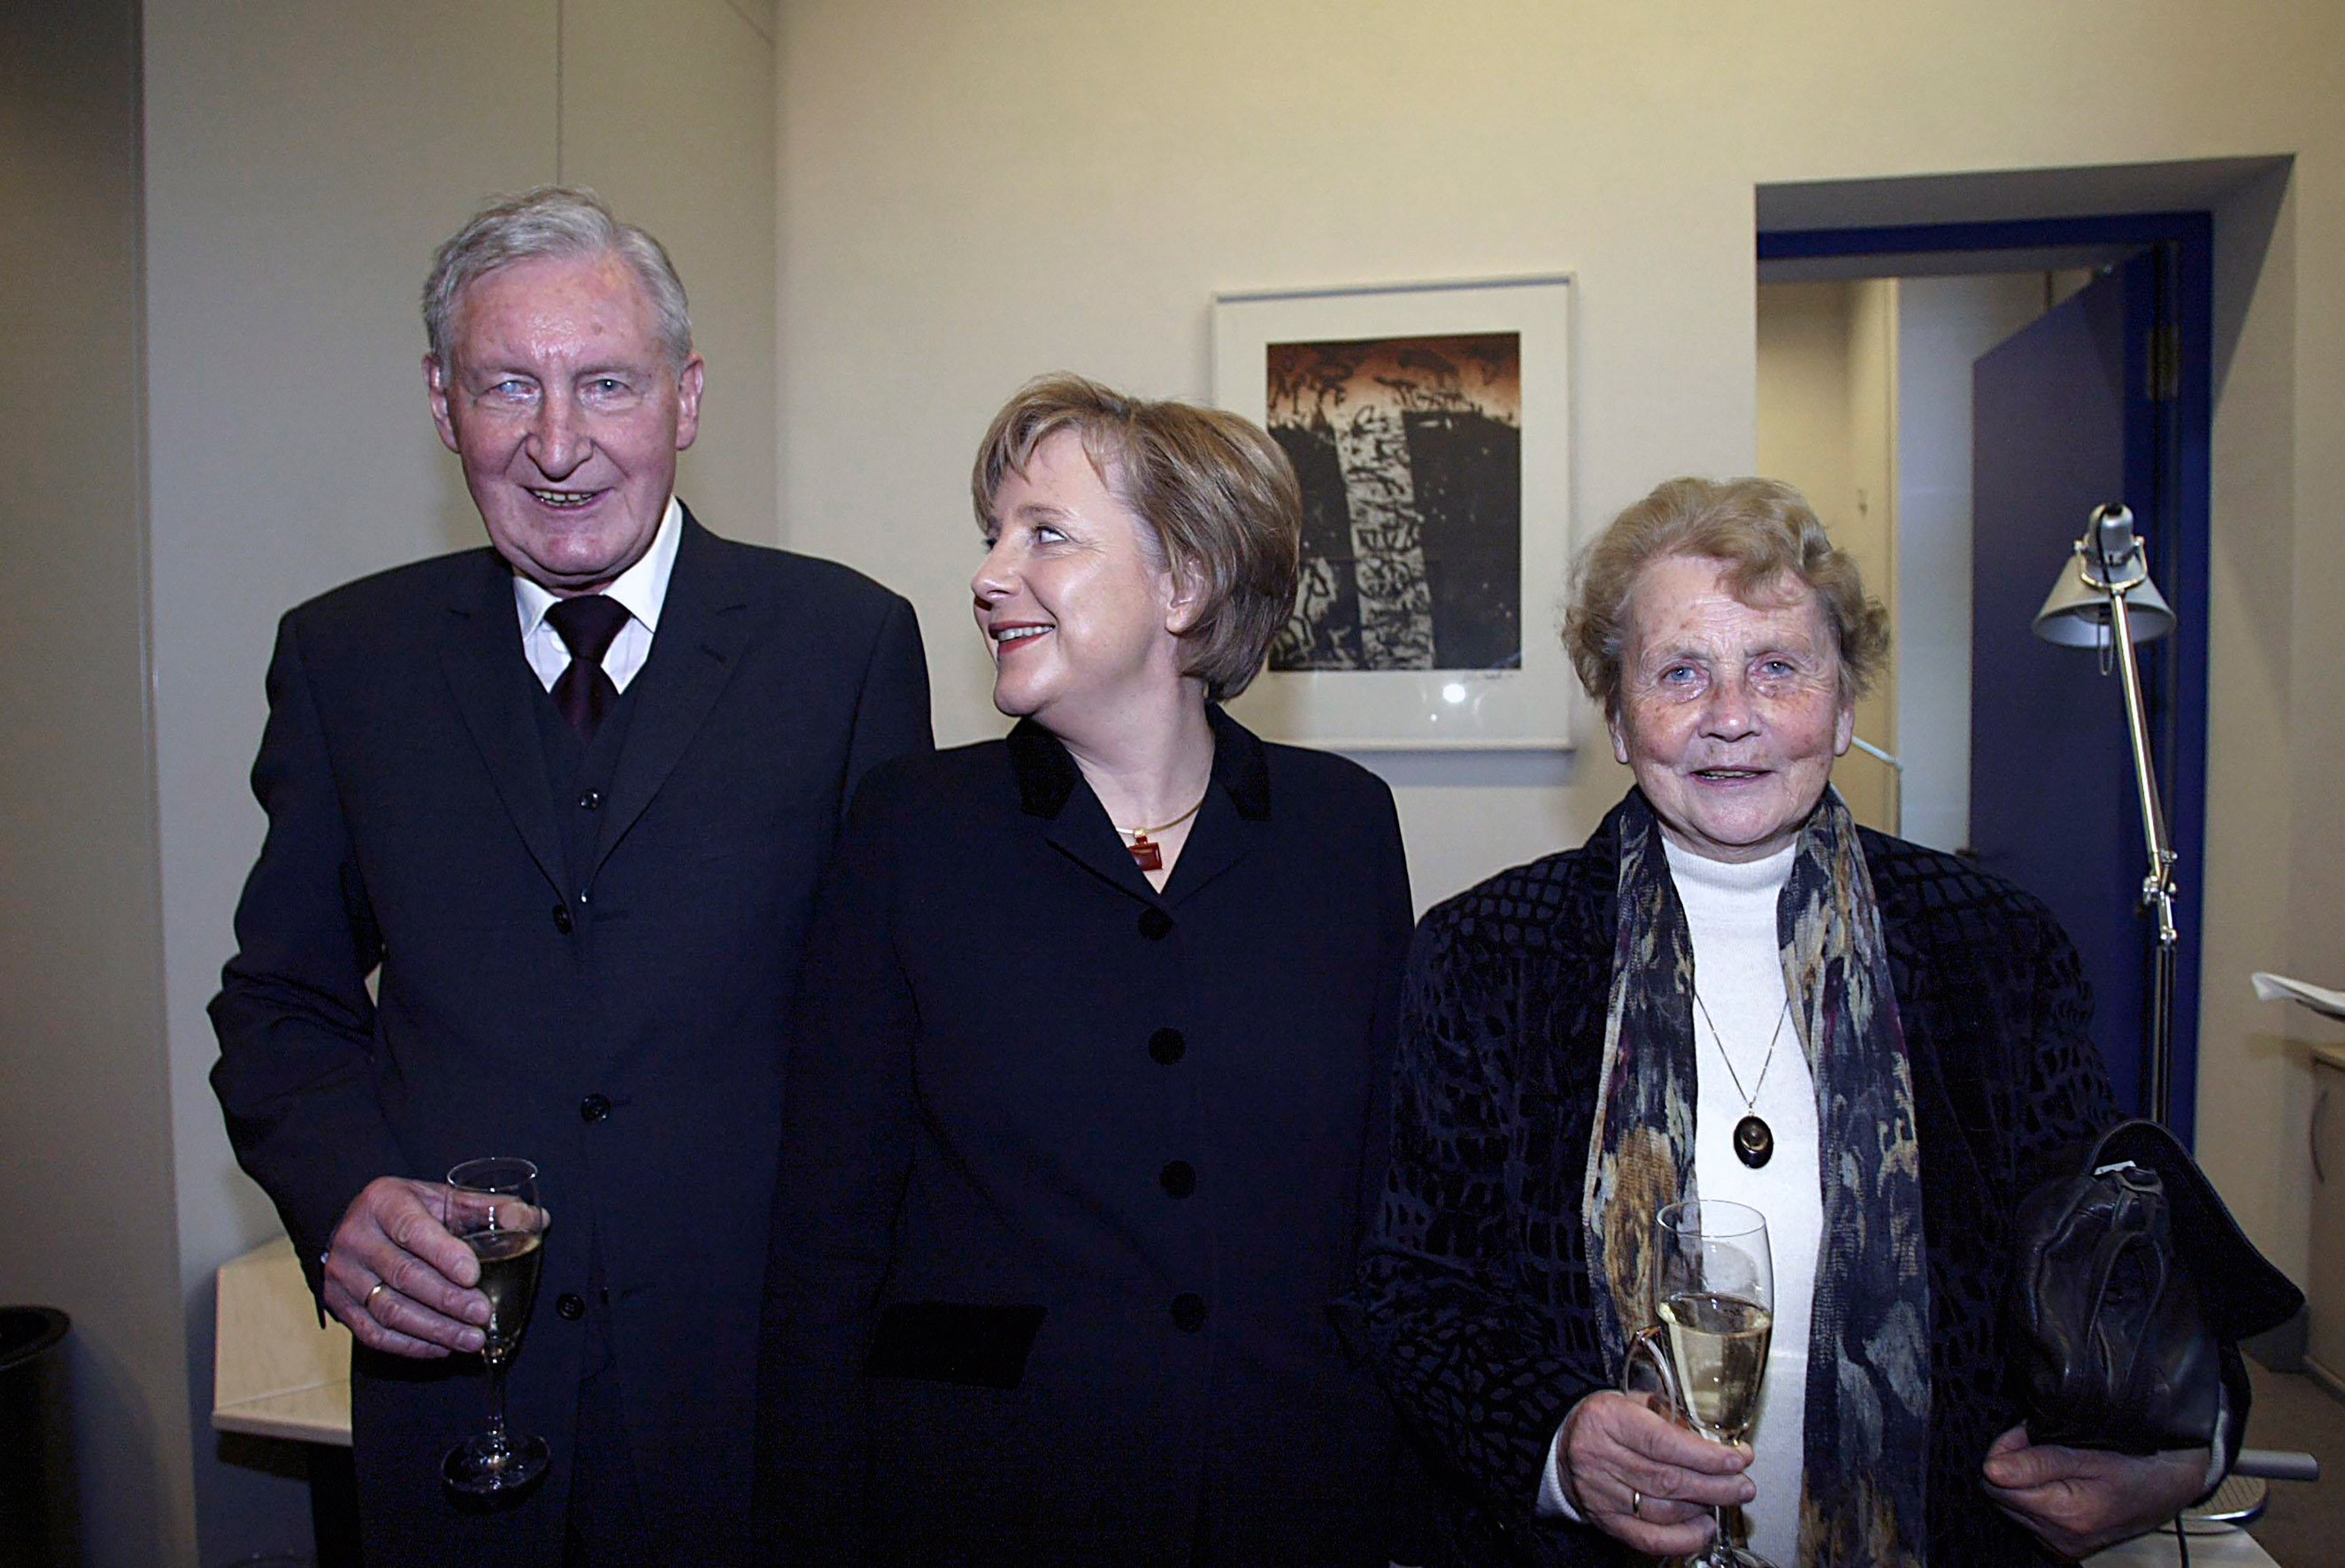 Angela Merkel on the eve of her election in 2005 with parents. Herlind Kasner, Angela Merkel’s mother, from Hamburg was a Latin and English teacher. Her father, Horst Kasner, originally from Berlin, was a pastor in the Protestant Church in Germany.